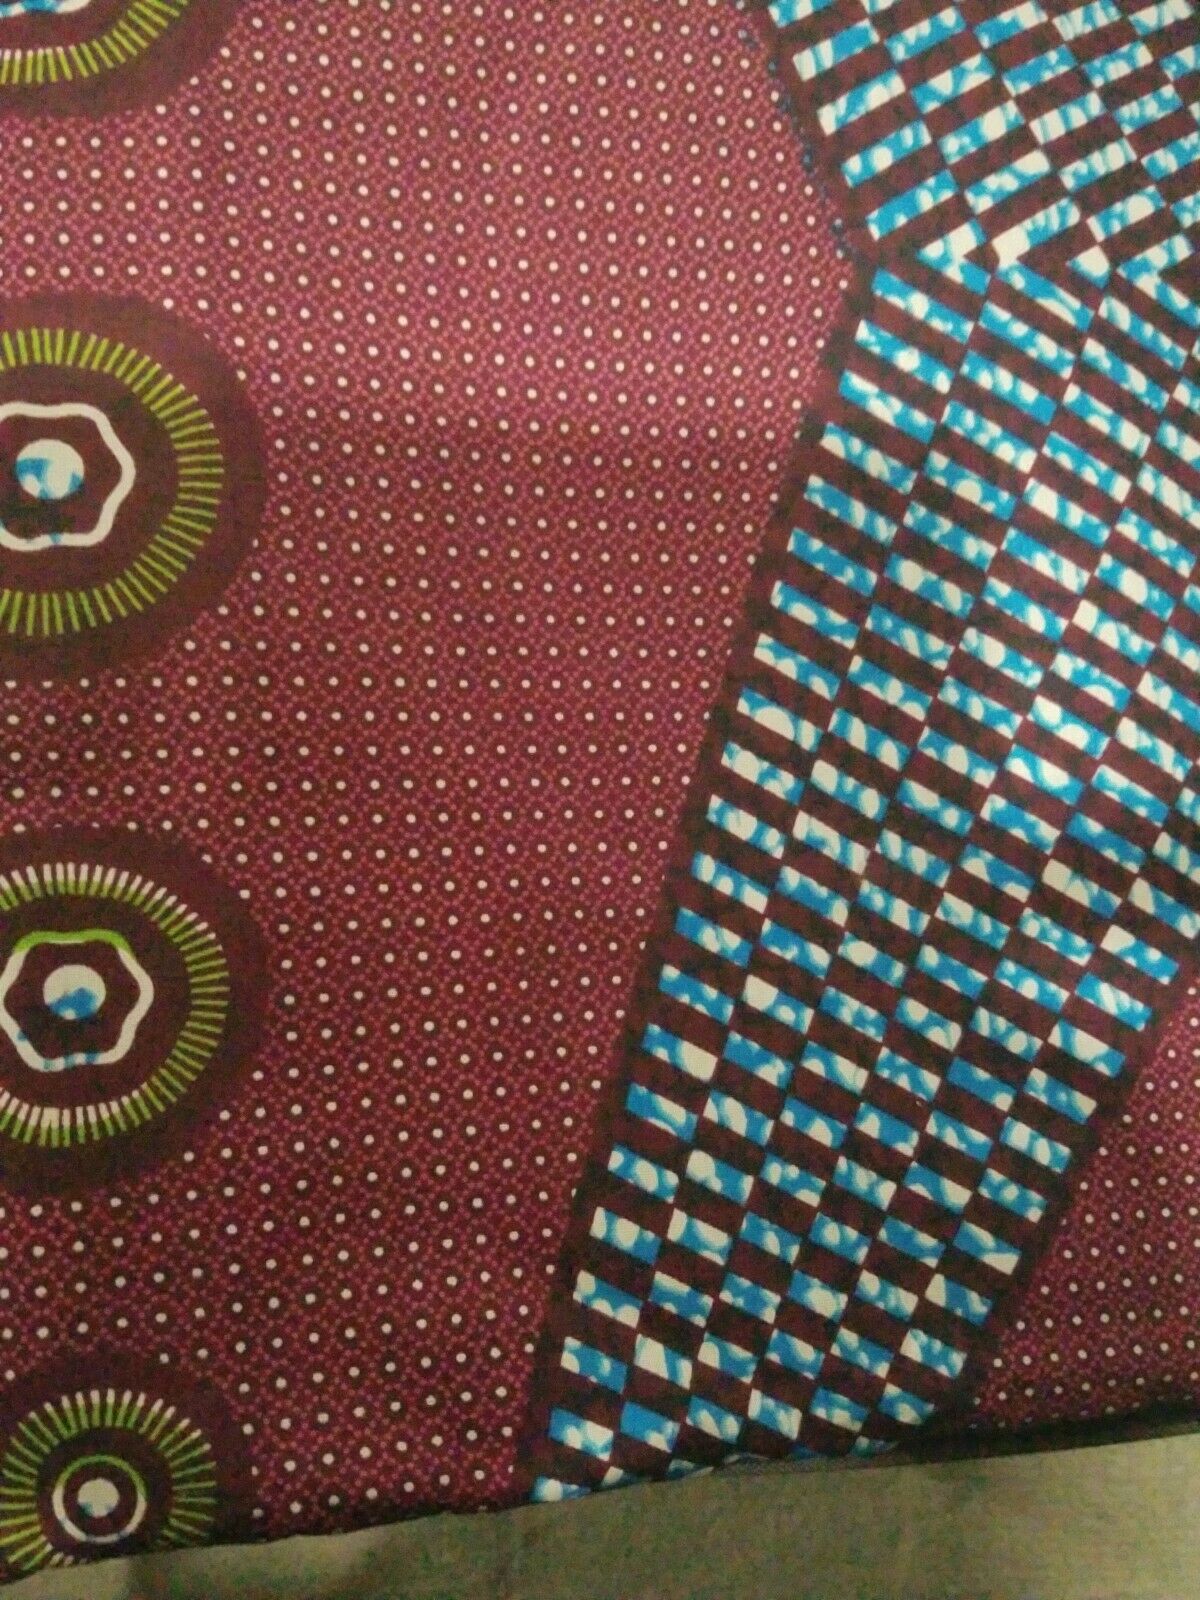 Brown MultiAfrican Print 100% Cotton Fabric ~2yards×46"~$12